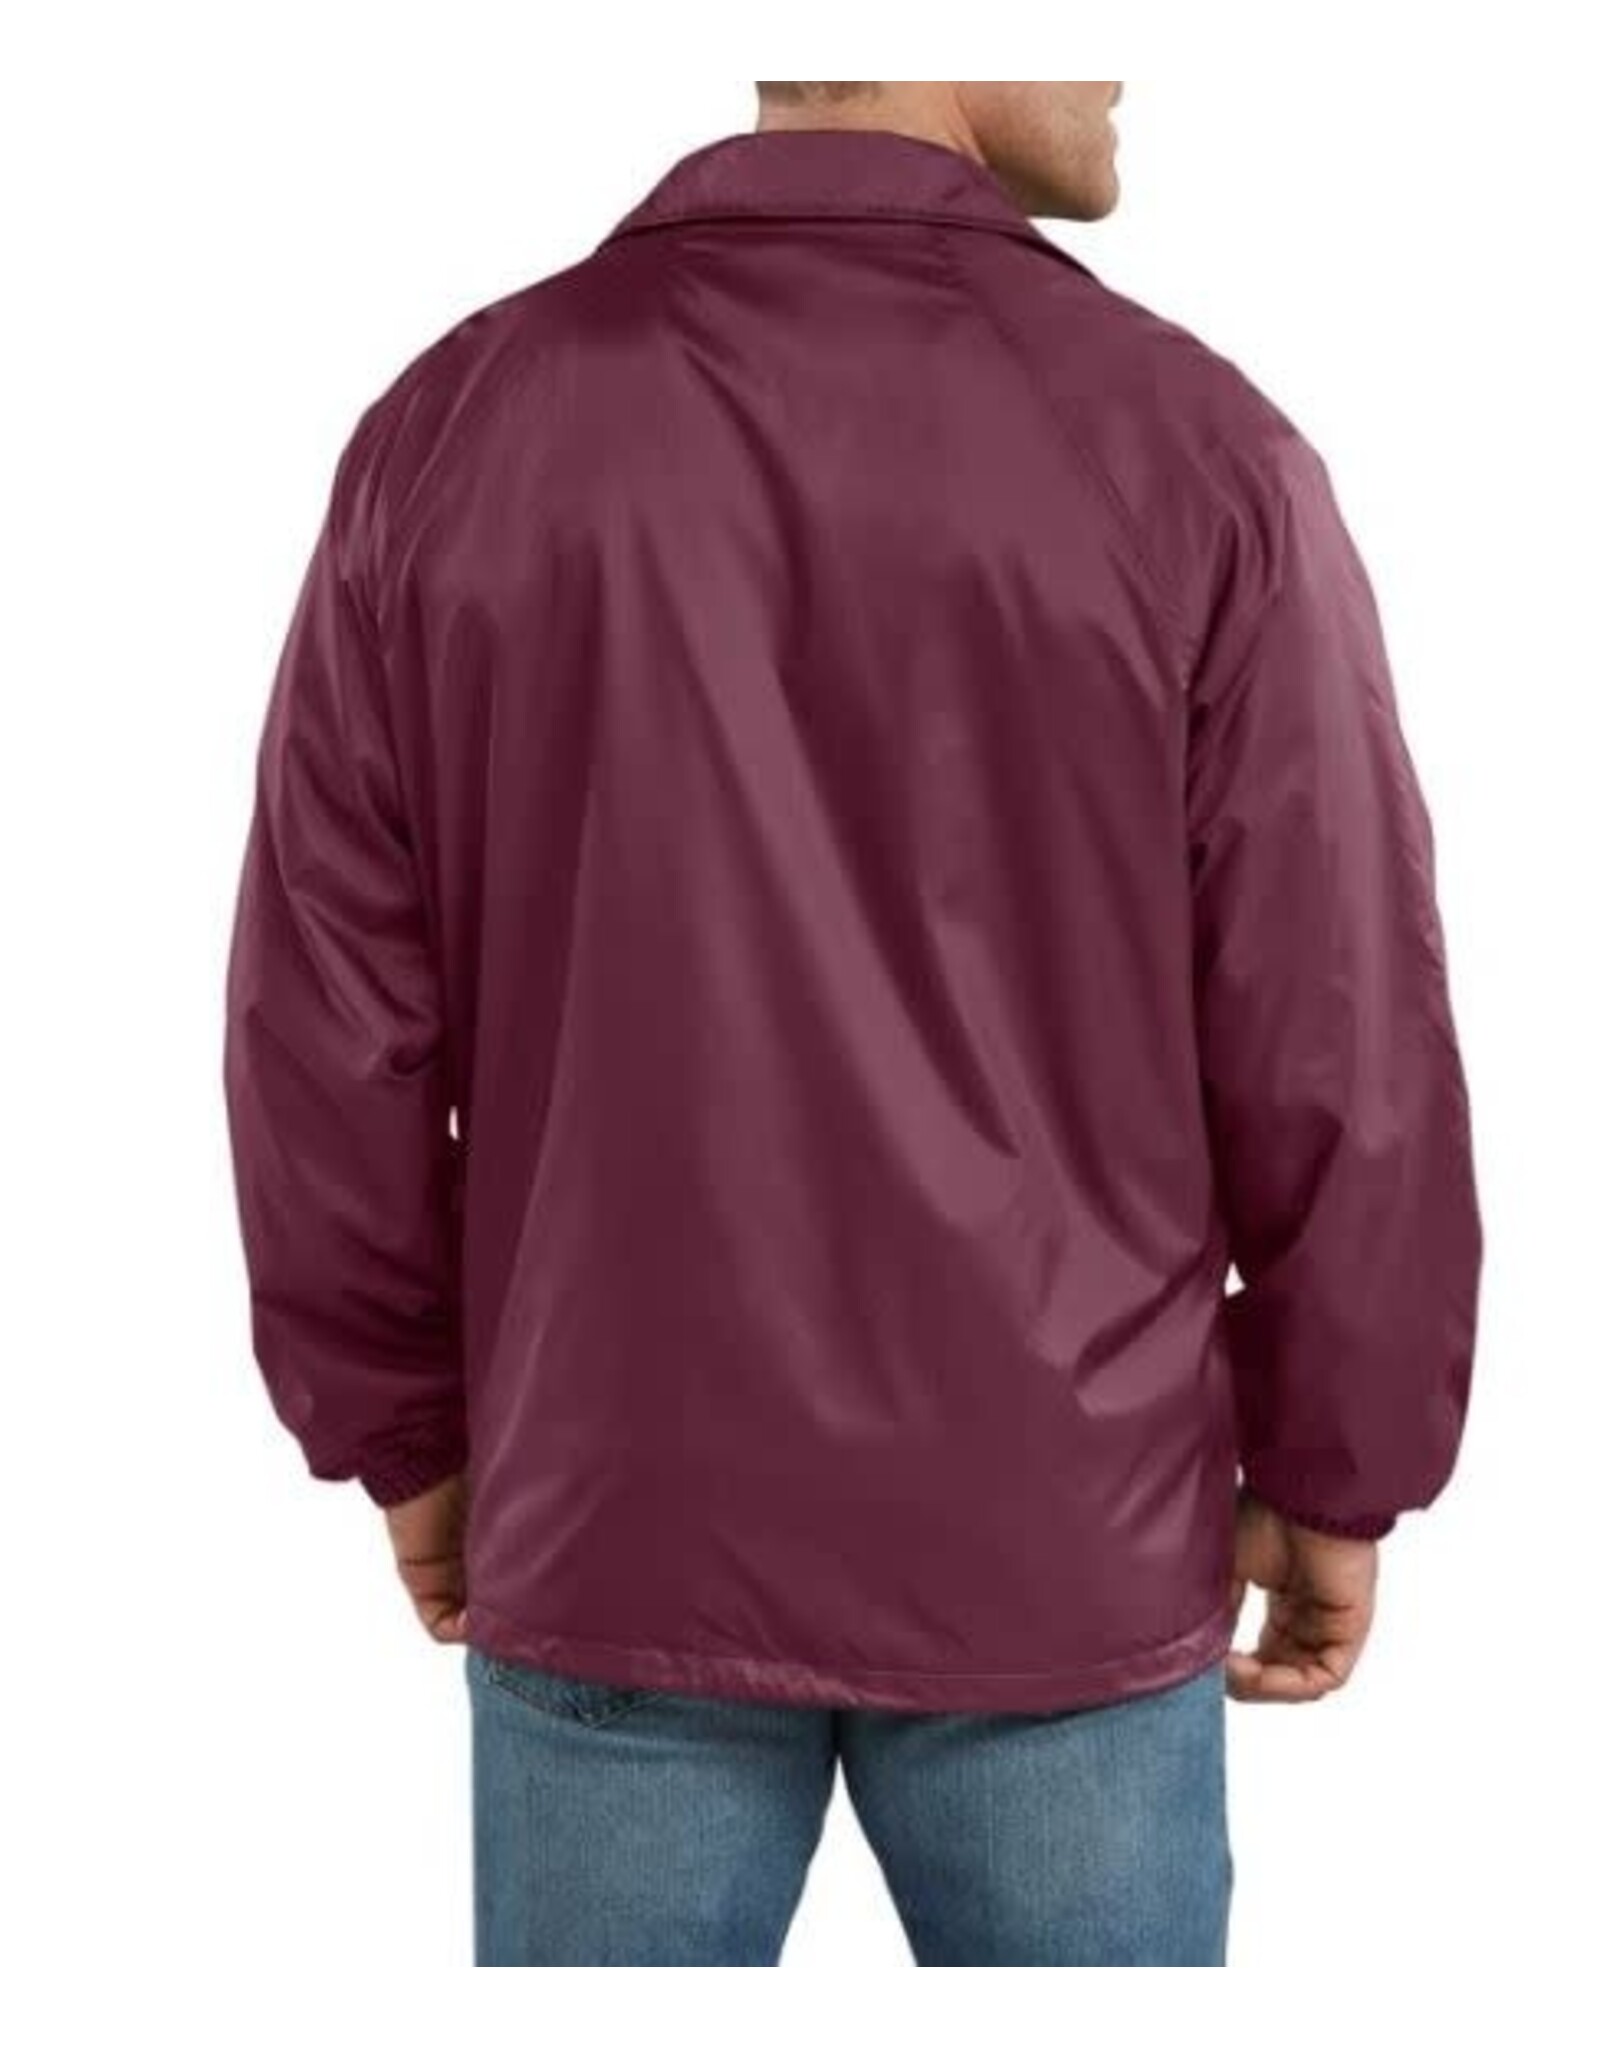 DICKIES Snap Front Nylon Jacket Burgundy - 76242BY